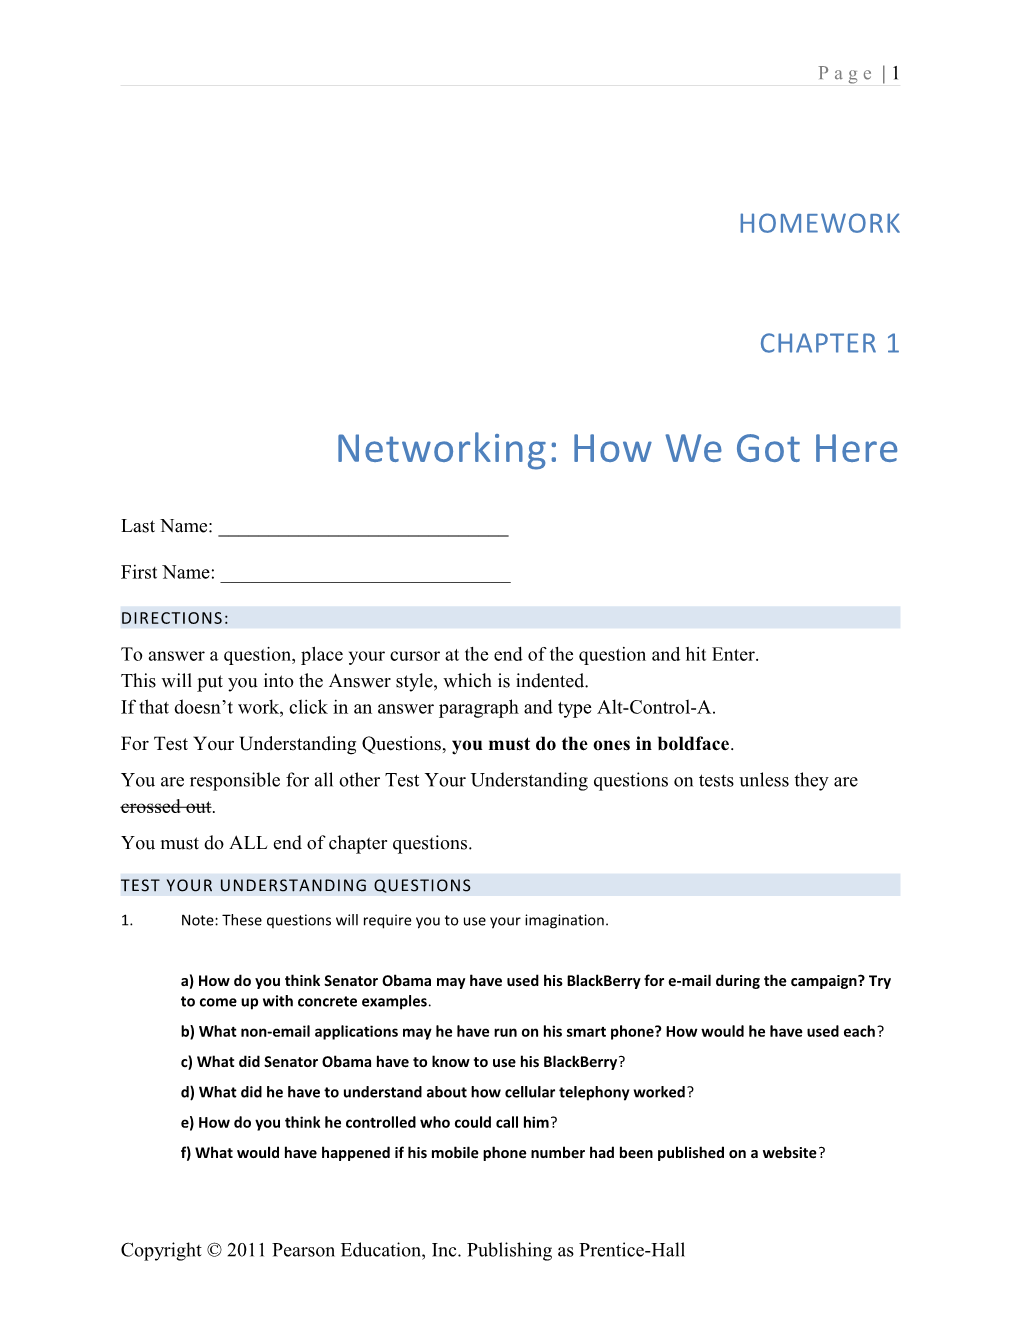 Networking: How We Got Here